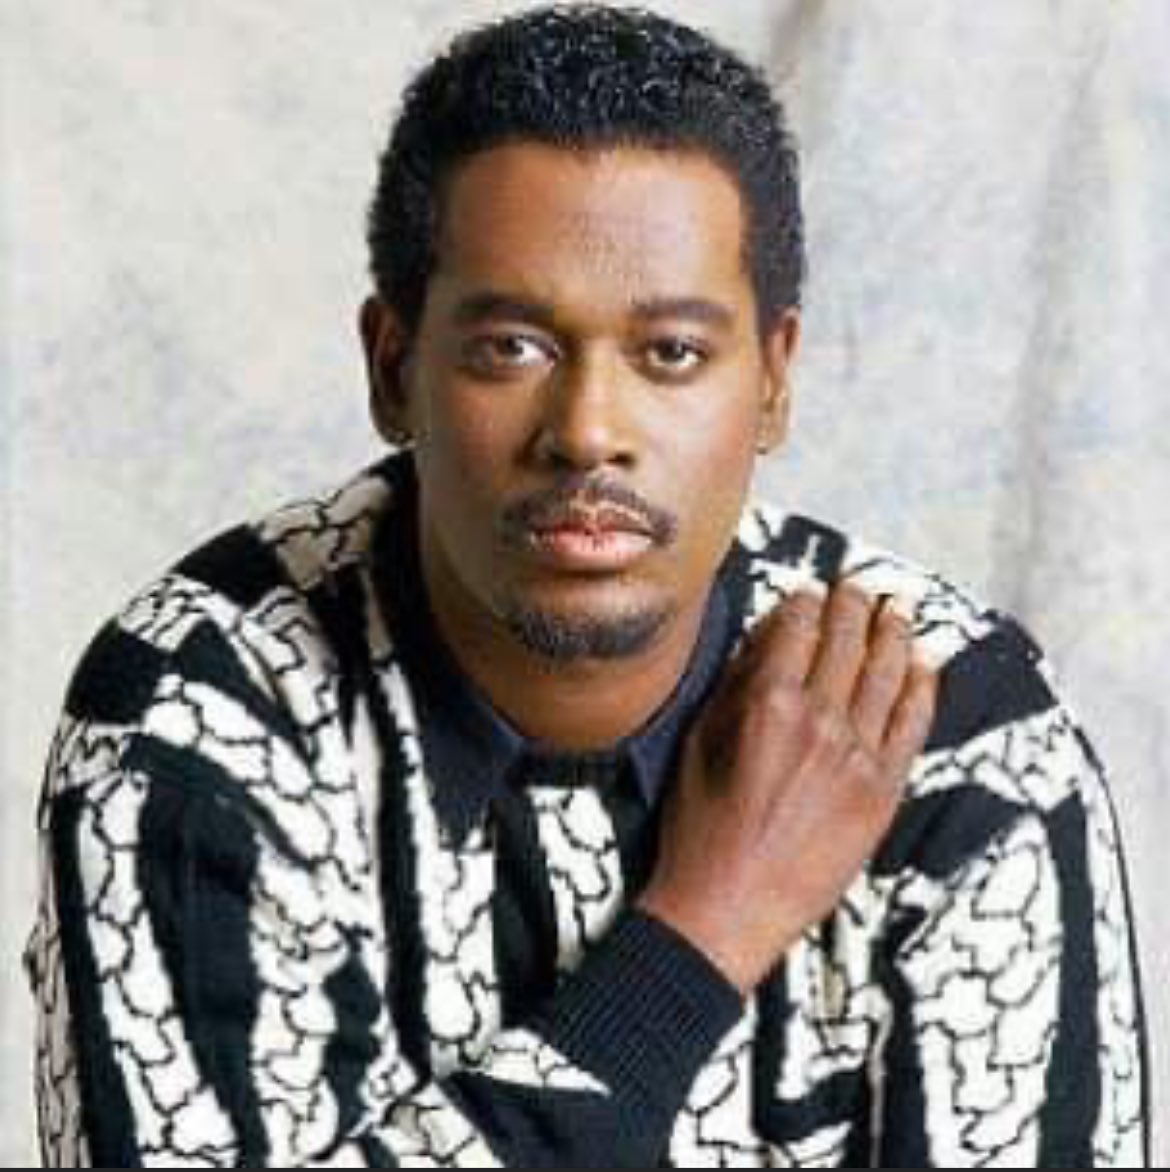 Today would have been Luther Vandross's 73rd Birthday, I still listen to his music everyday #RIPLegend